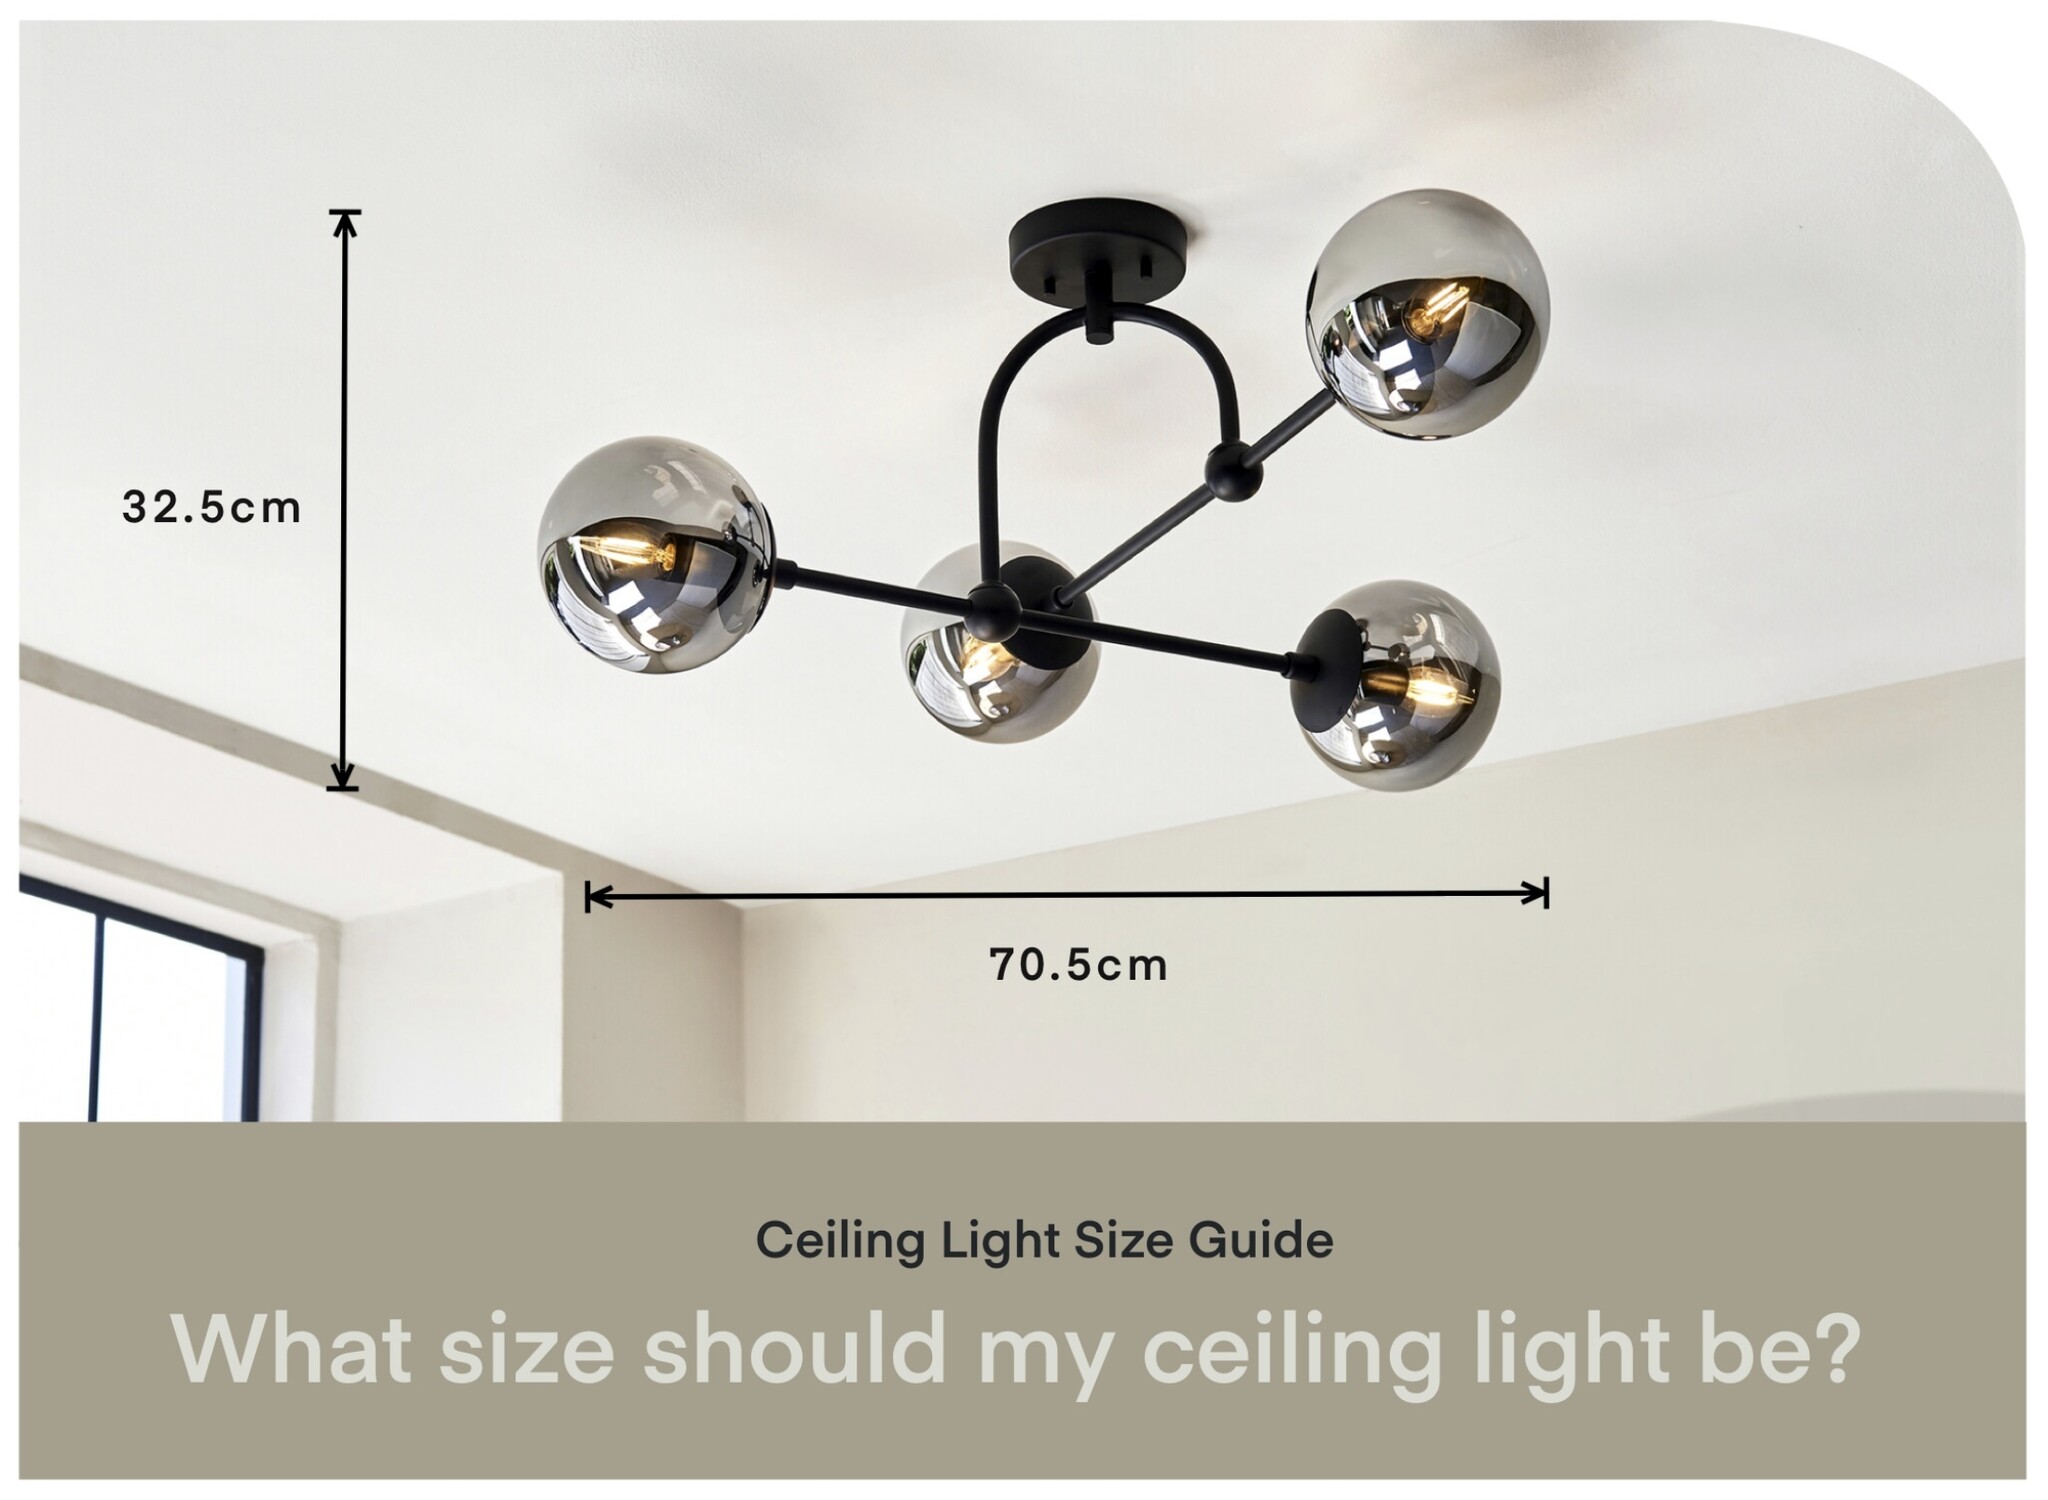 What size should my ceiling light be? Ceiling Light Size Guide